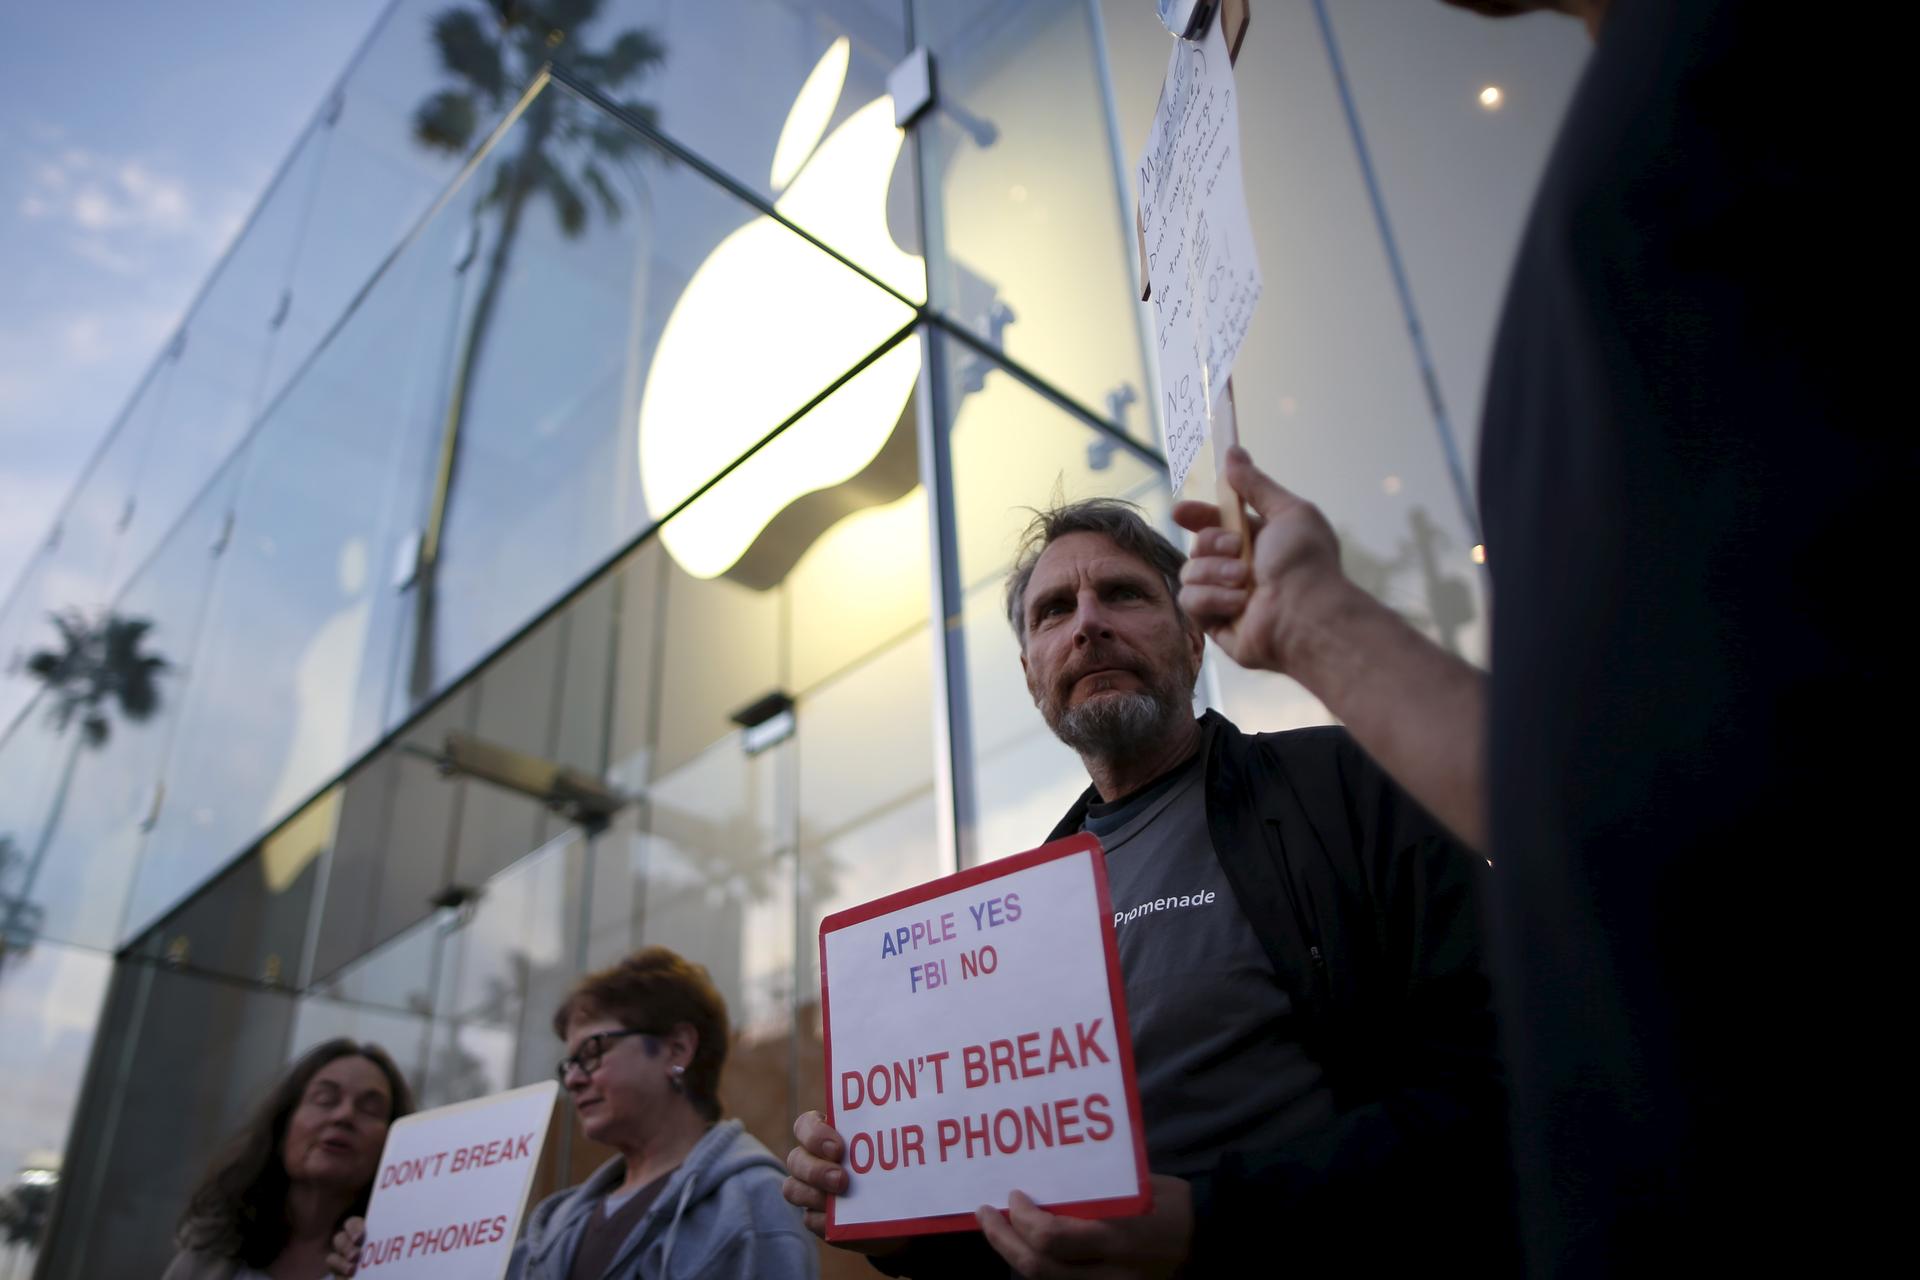 Protestors gathered at a small rally in support of Apple's refusal to help the FBI access the cell phone of a gunman involved in the killings of 14 people in San Bernardino, California in February.